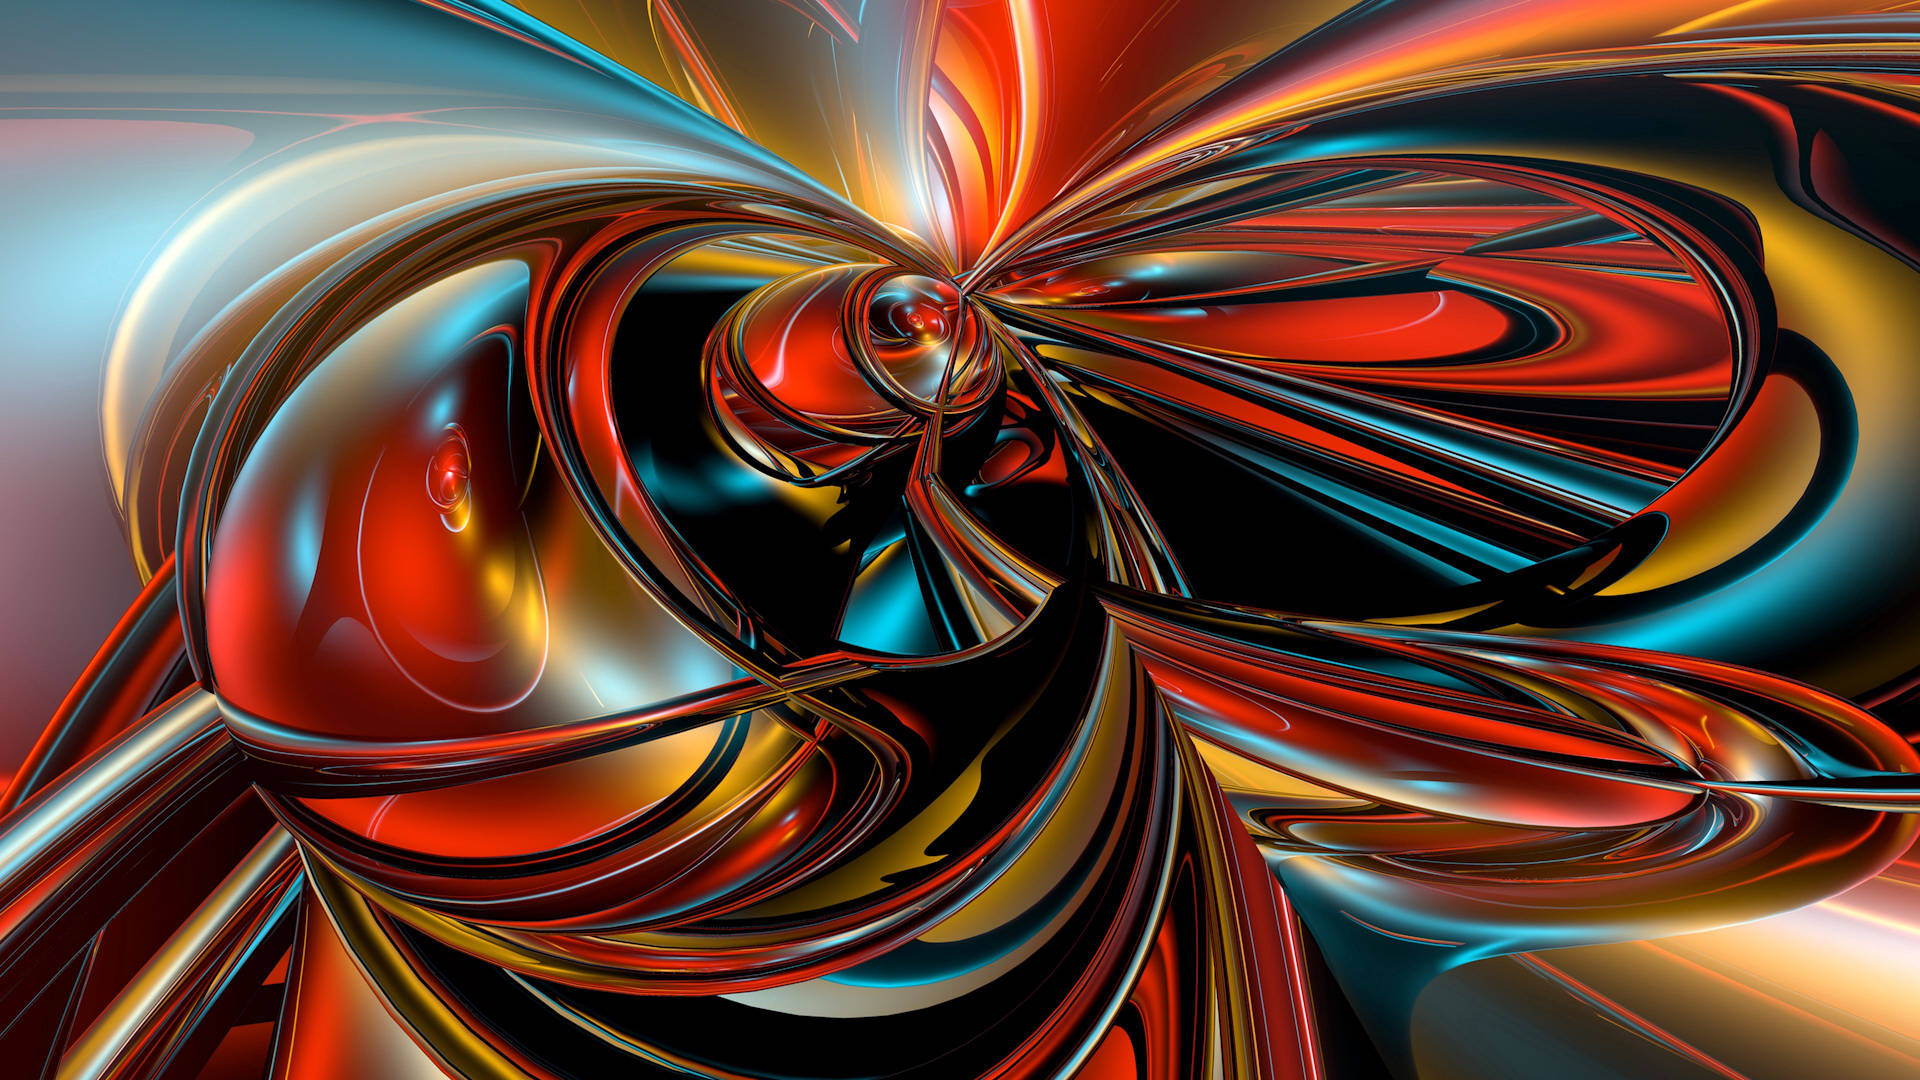 A Psychedelic Abstract Artwork In Vibrant 3d Color Background